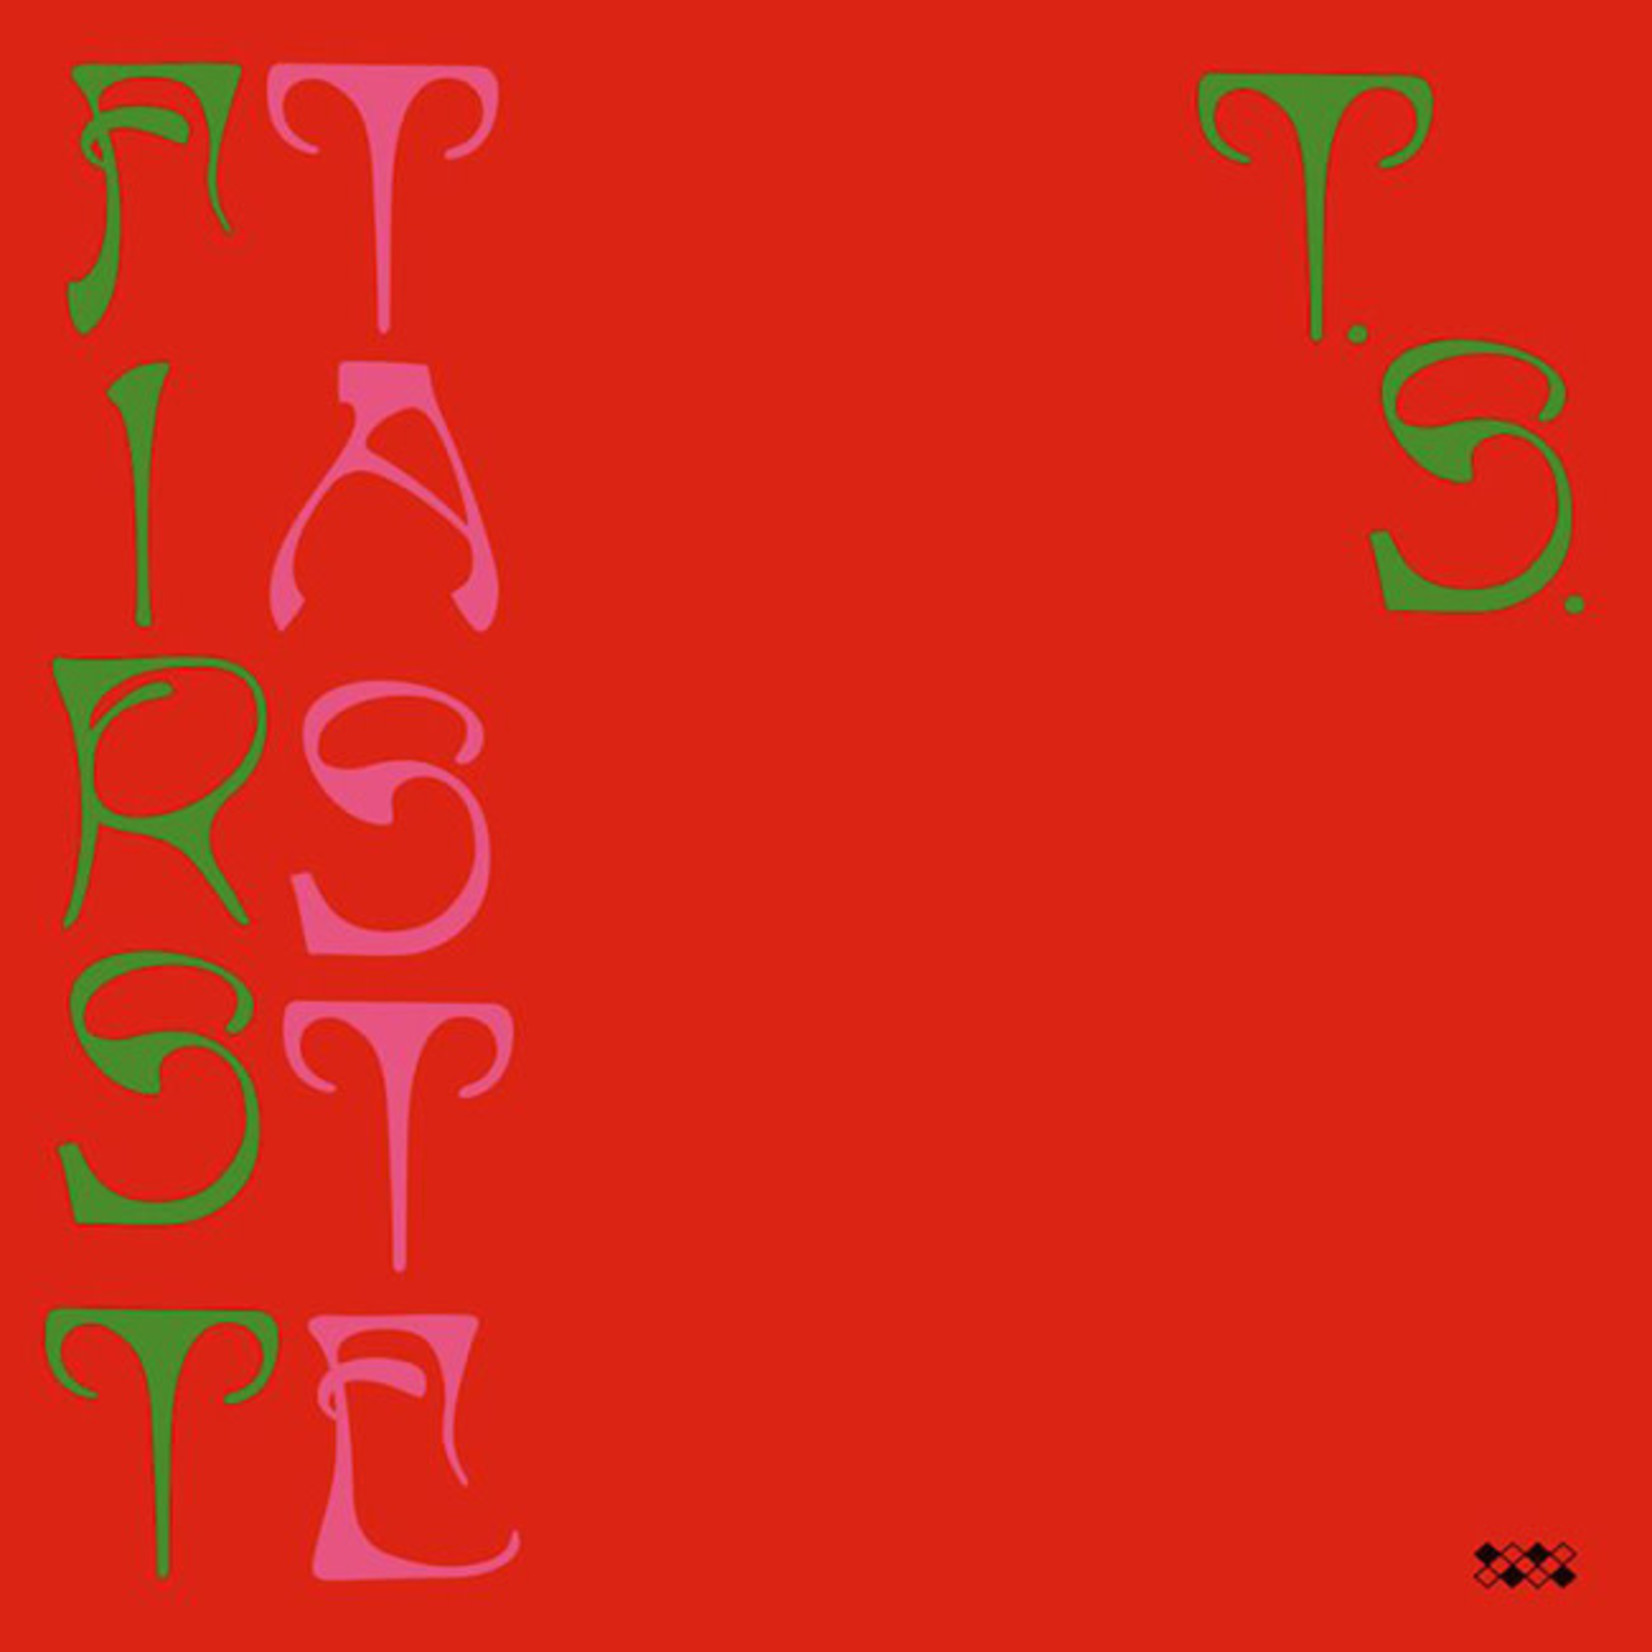 [New] Ty Segall - First Taste